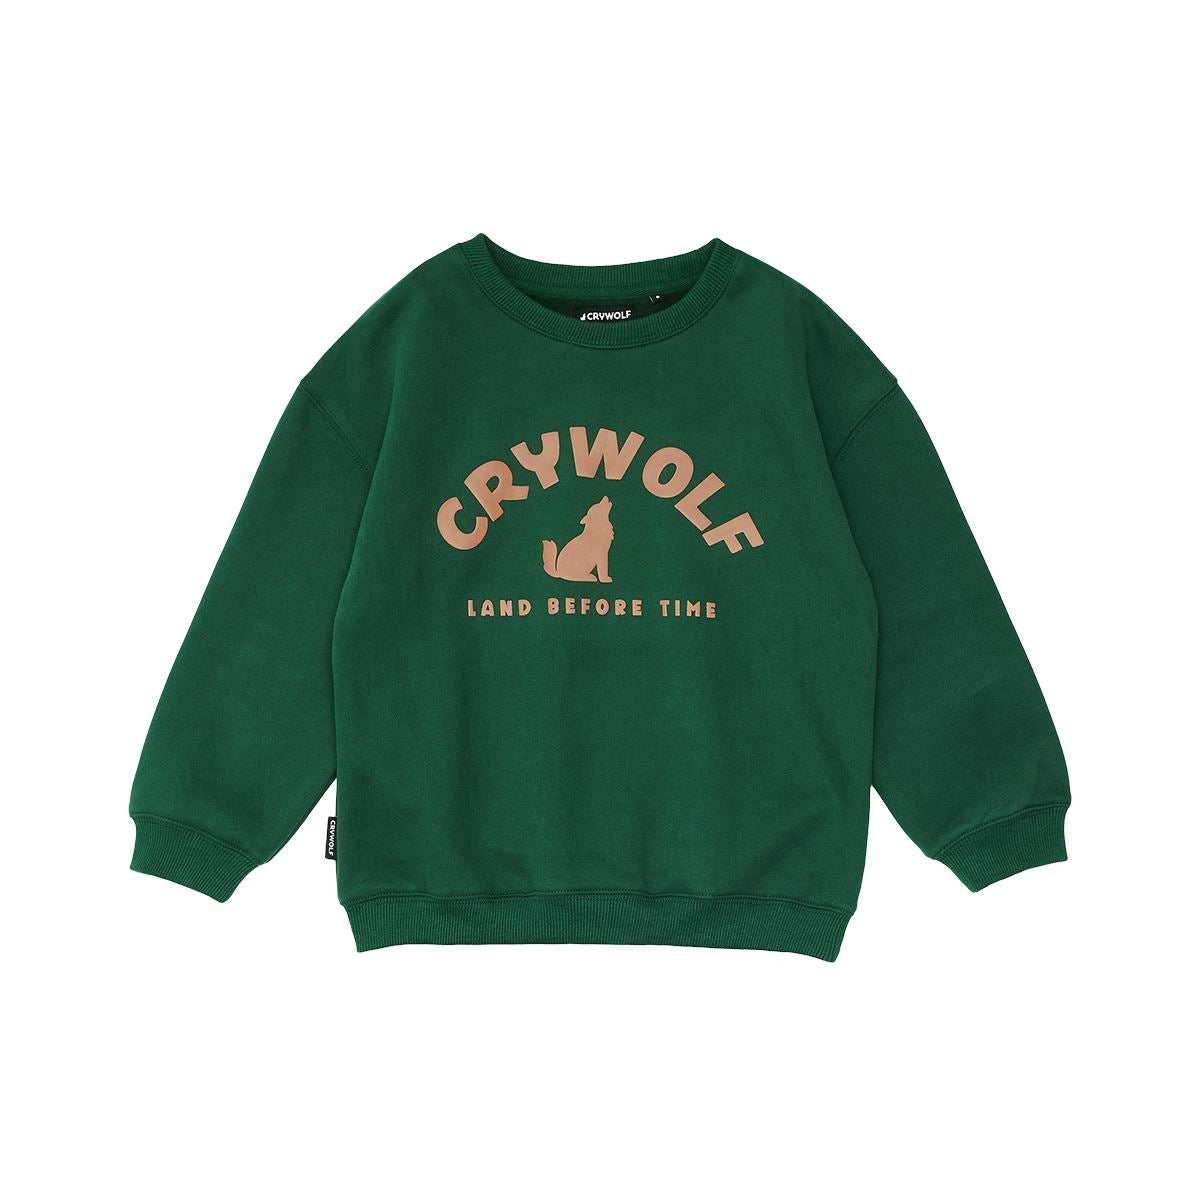 Crywolf Chill Sweater - Forest Jumper Crywolf 